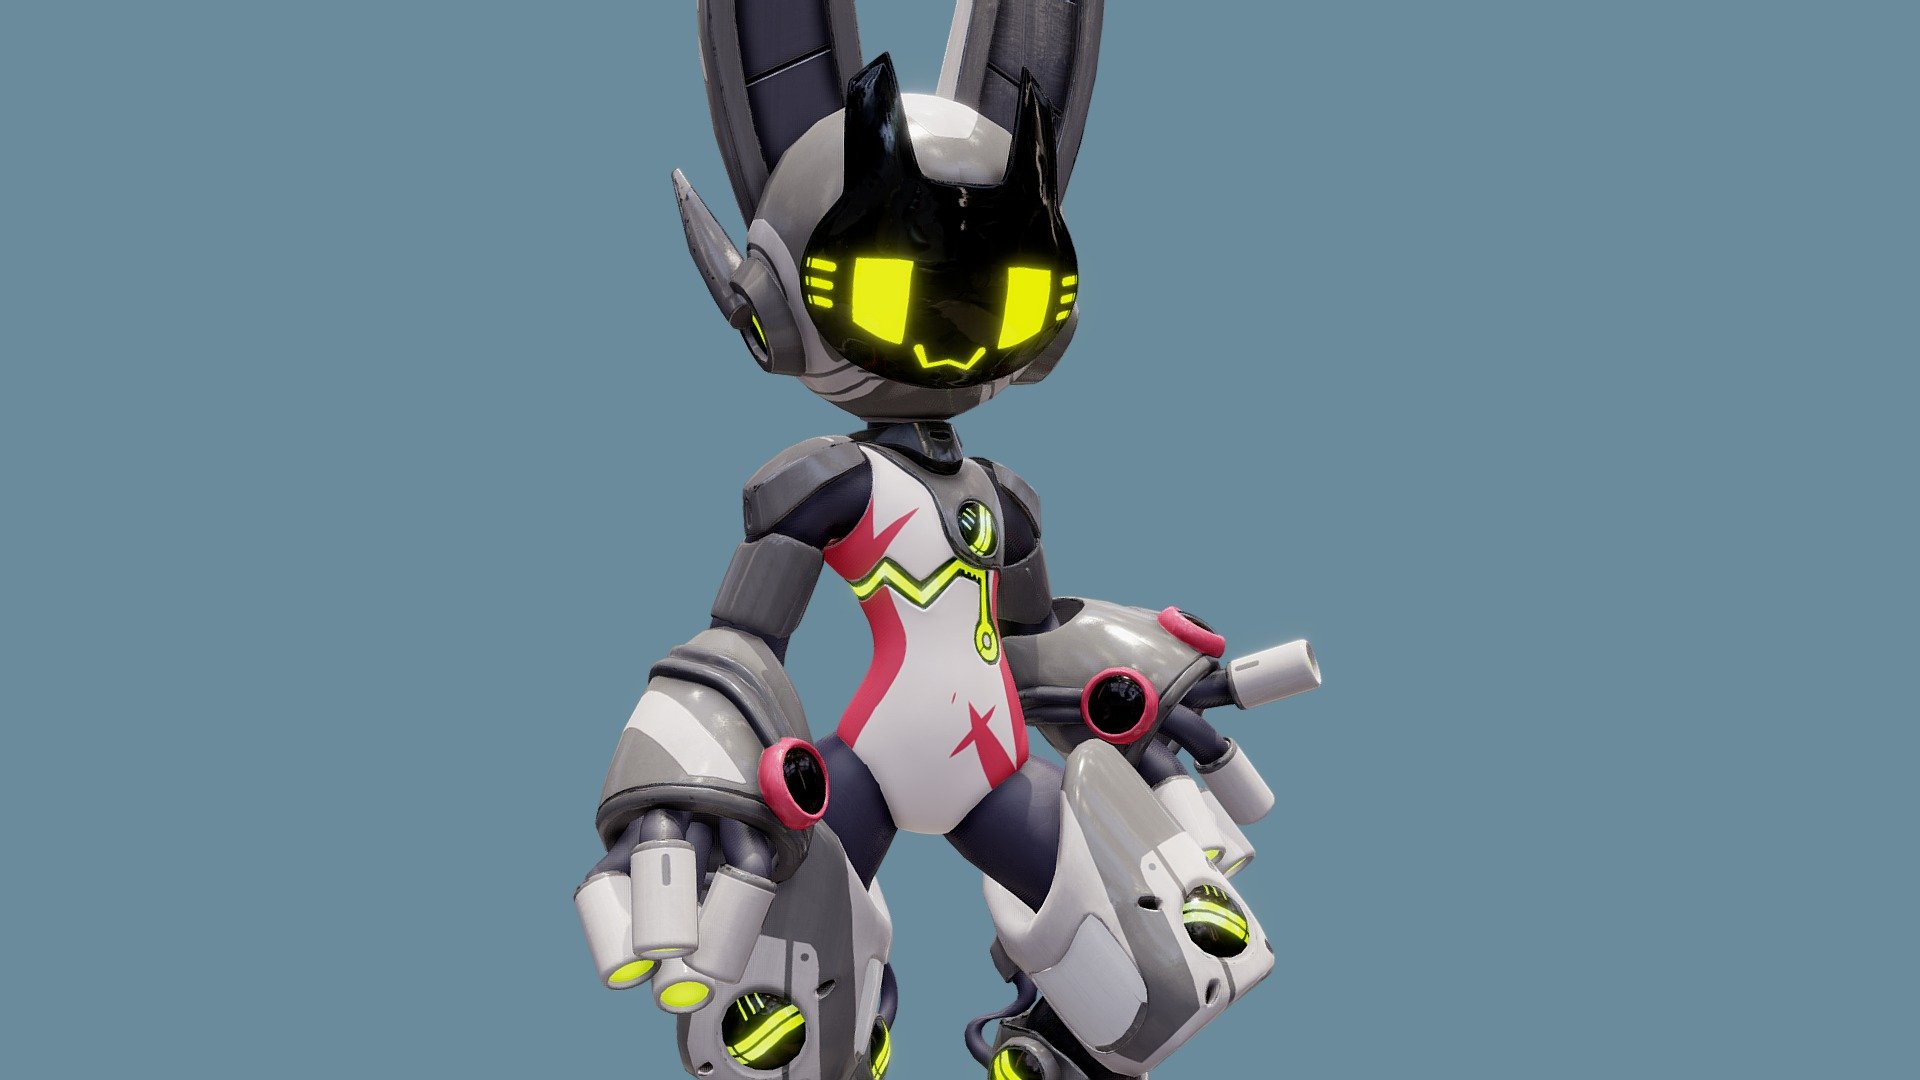 A 3d model or the Rabbizorg; this's just a piece for fun and practice 
but I do tend to make these for vrchat down the road I just need to improve some things. 
https://twitter.com/lordyanyu/status/1330135601941794816
^Link to the original creator^ - Rabbizorg - 3D model by L.u.X 3d model